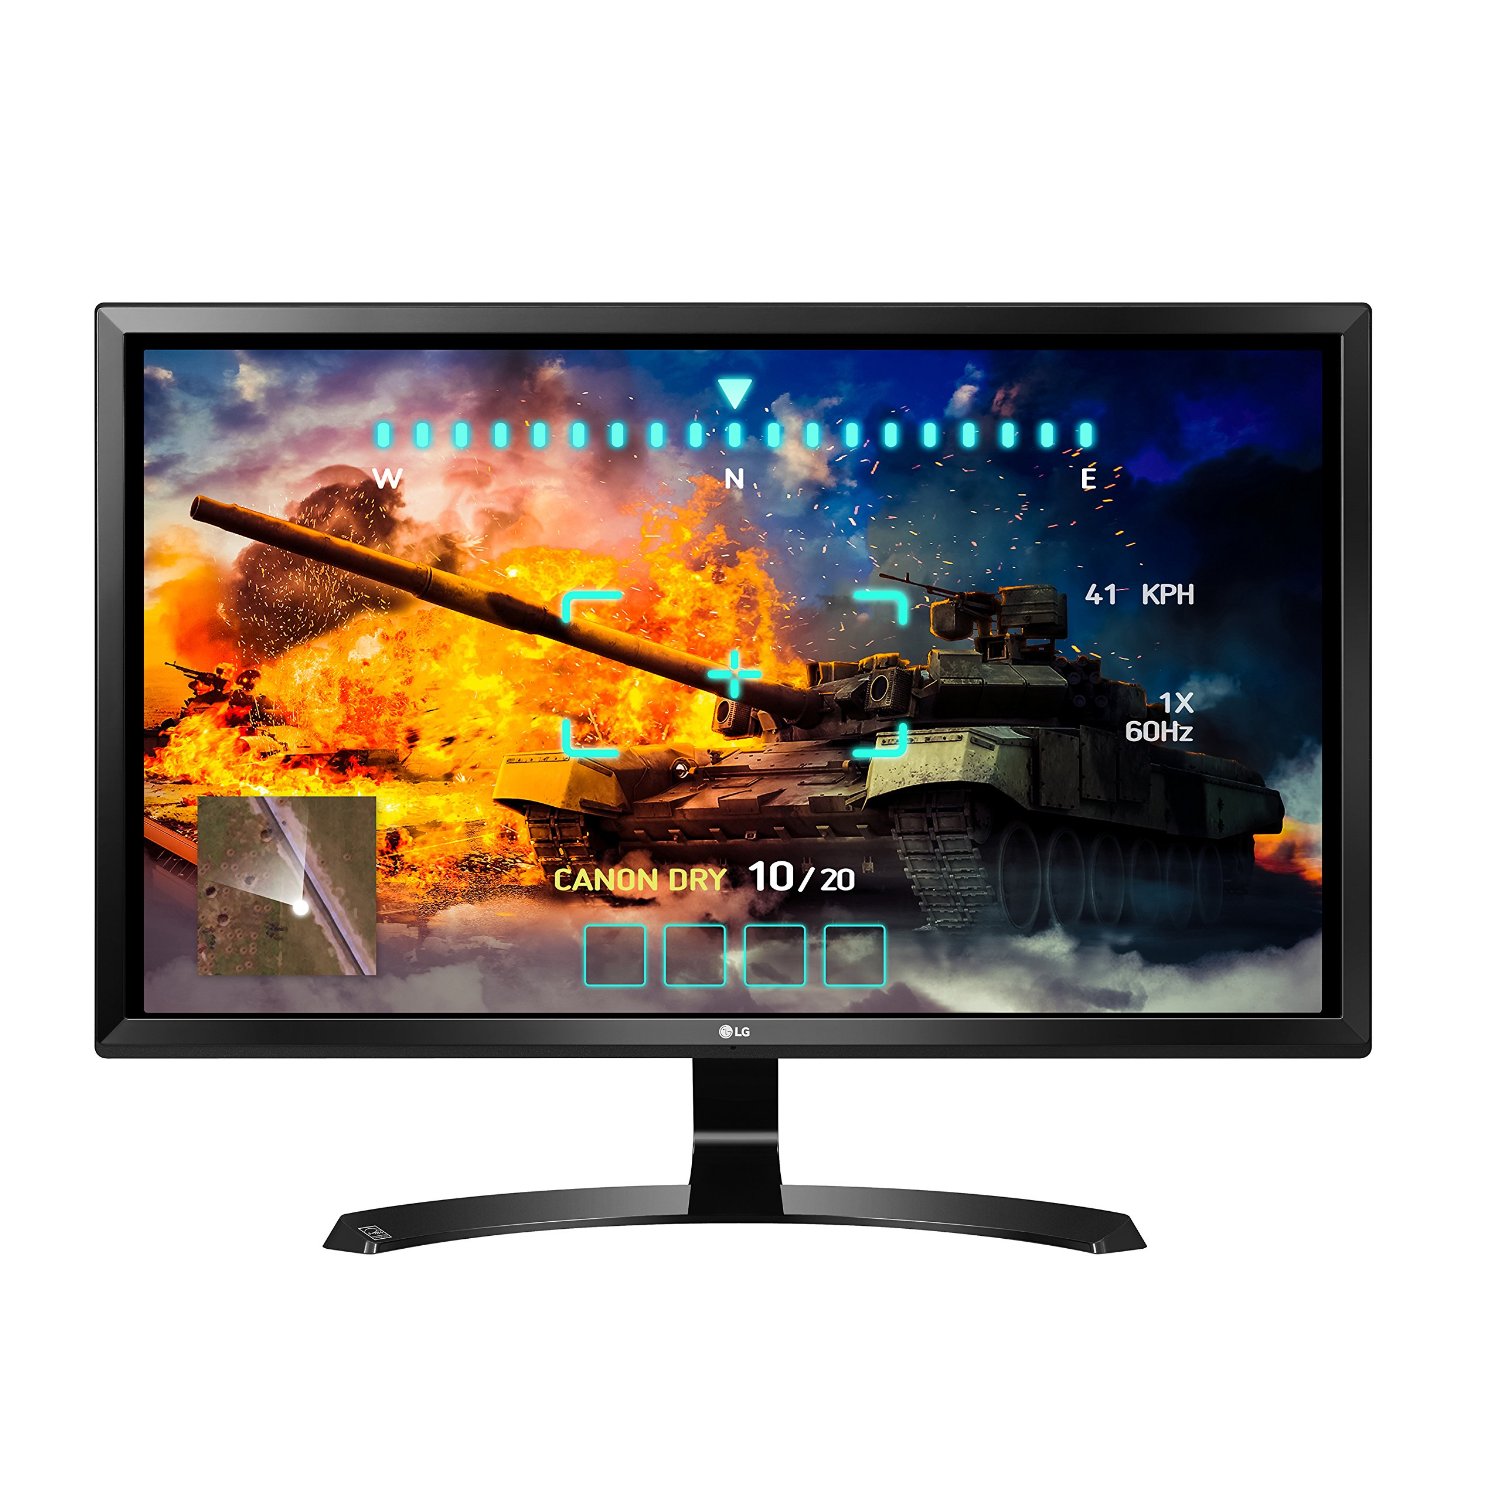 Futuristic Best Budget 4K Monitor For Ps4 Pro for Gamers